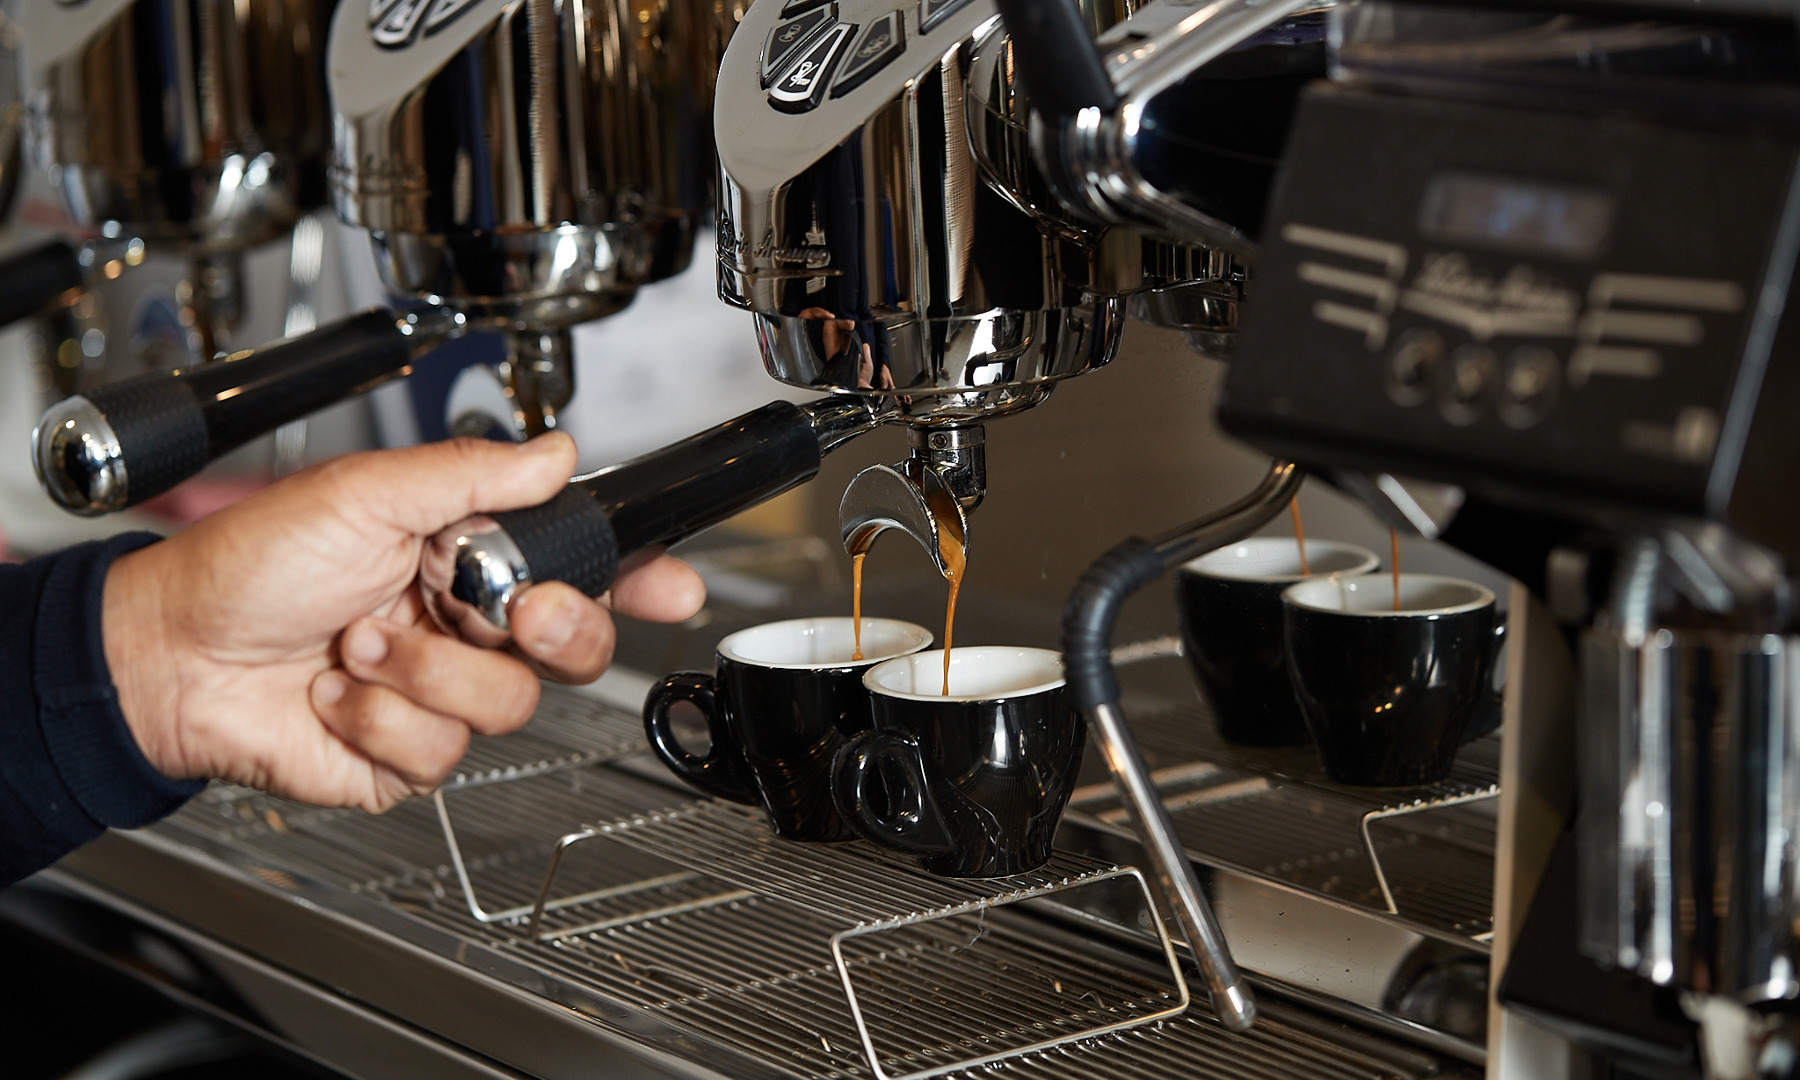 Close-up image of a barista's hand holding the portafilter of a coffee machine as the machine extracts coffee into two small mugs.